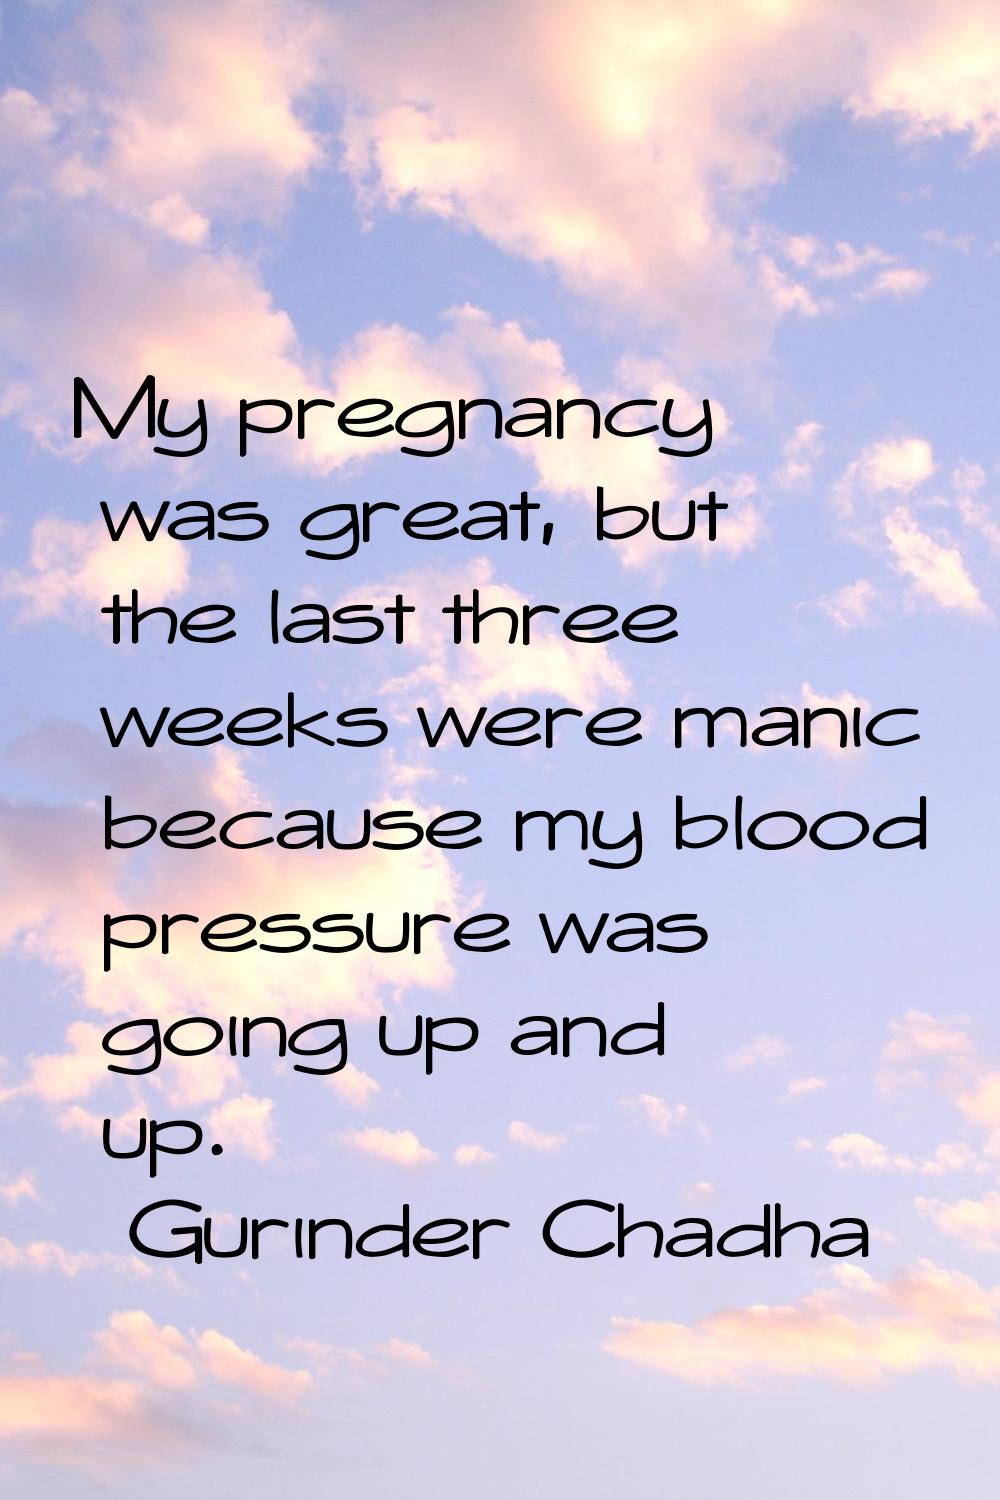 My pregnancy was great, but the last three weeks were manic because my blood pressure was going up 